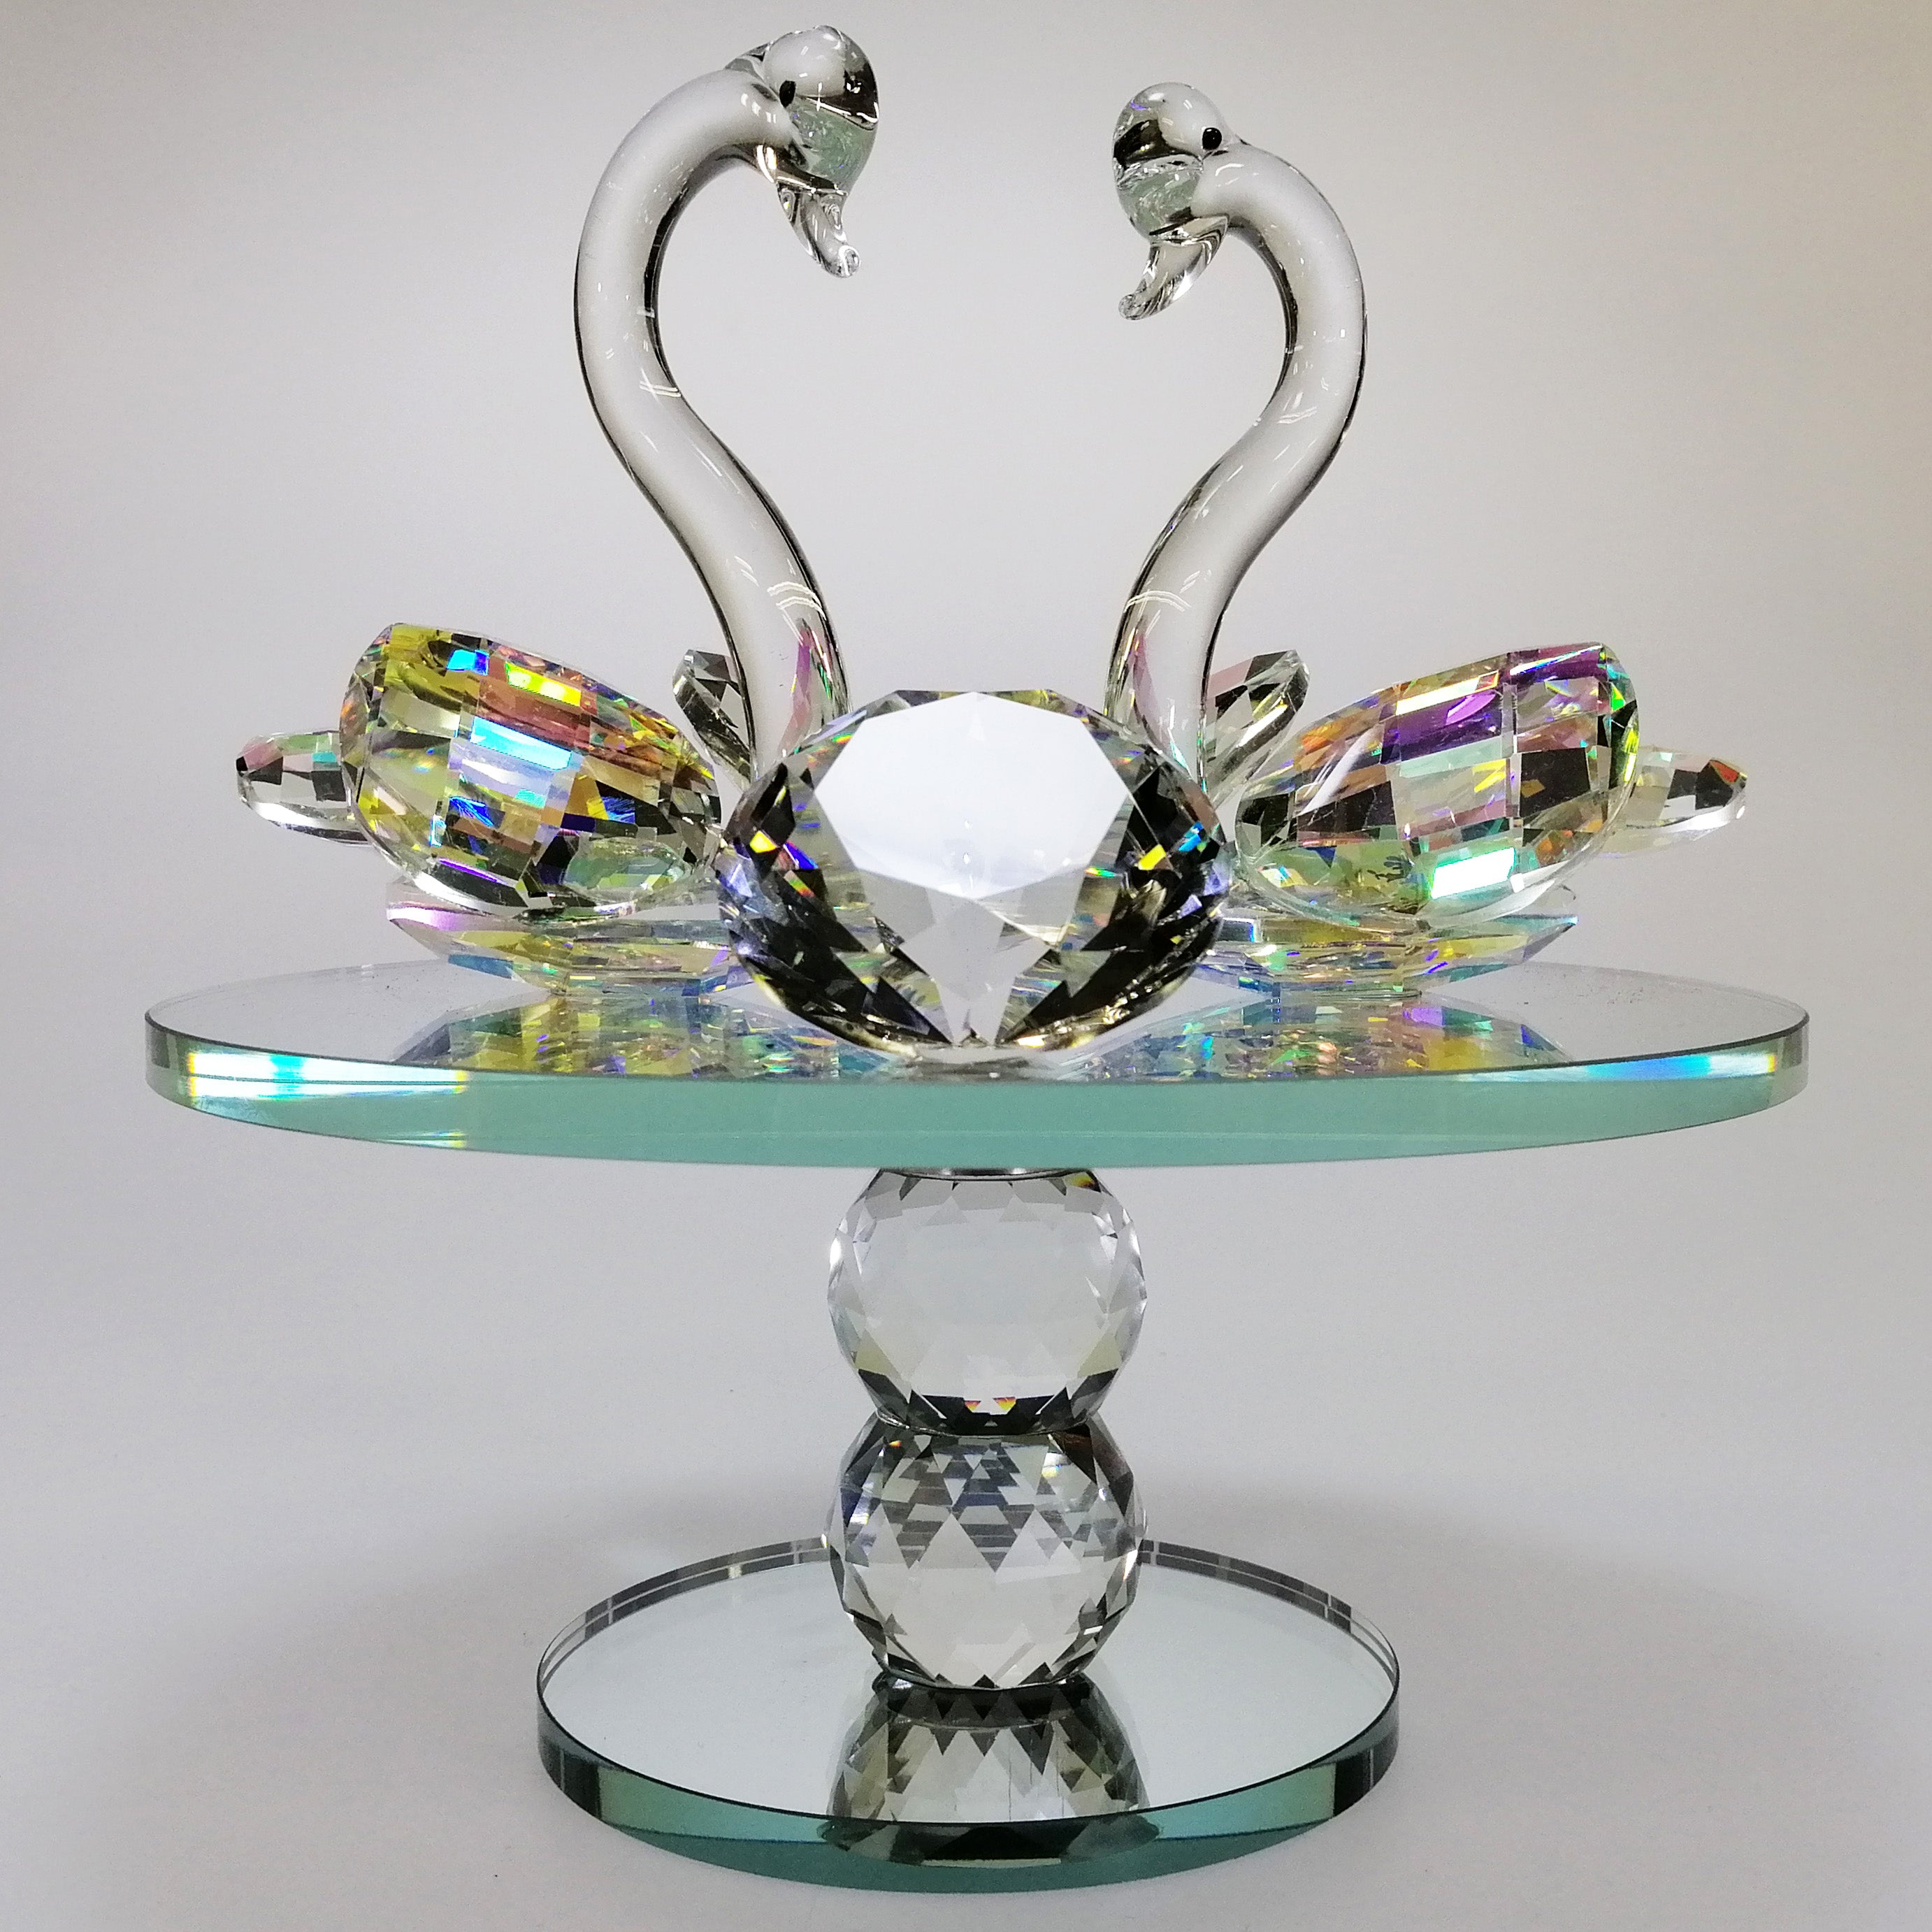 Large Iridescent Cut Glass Swans with Gem on Turnable Mirror Base